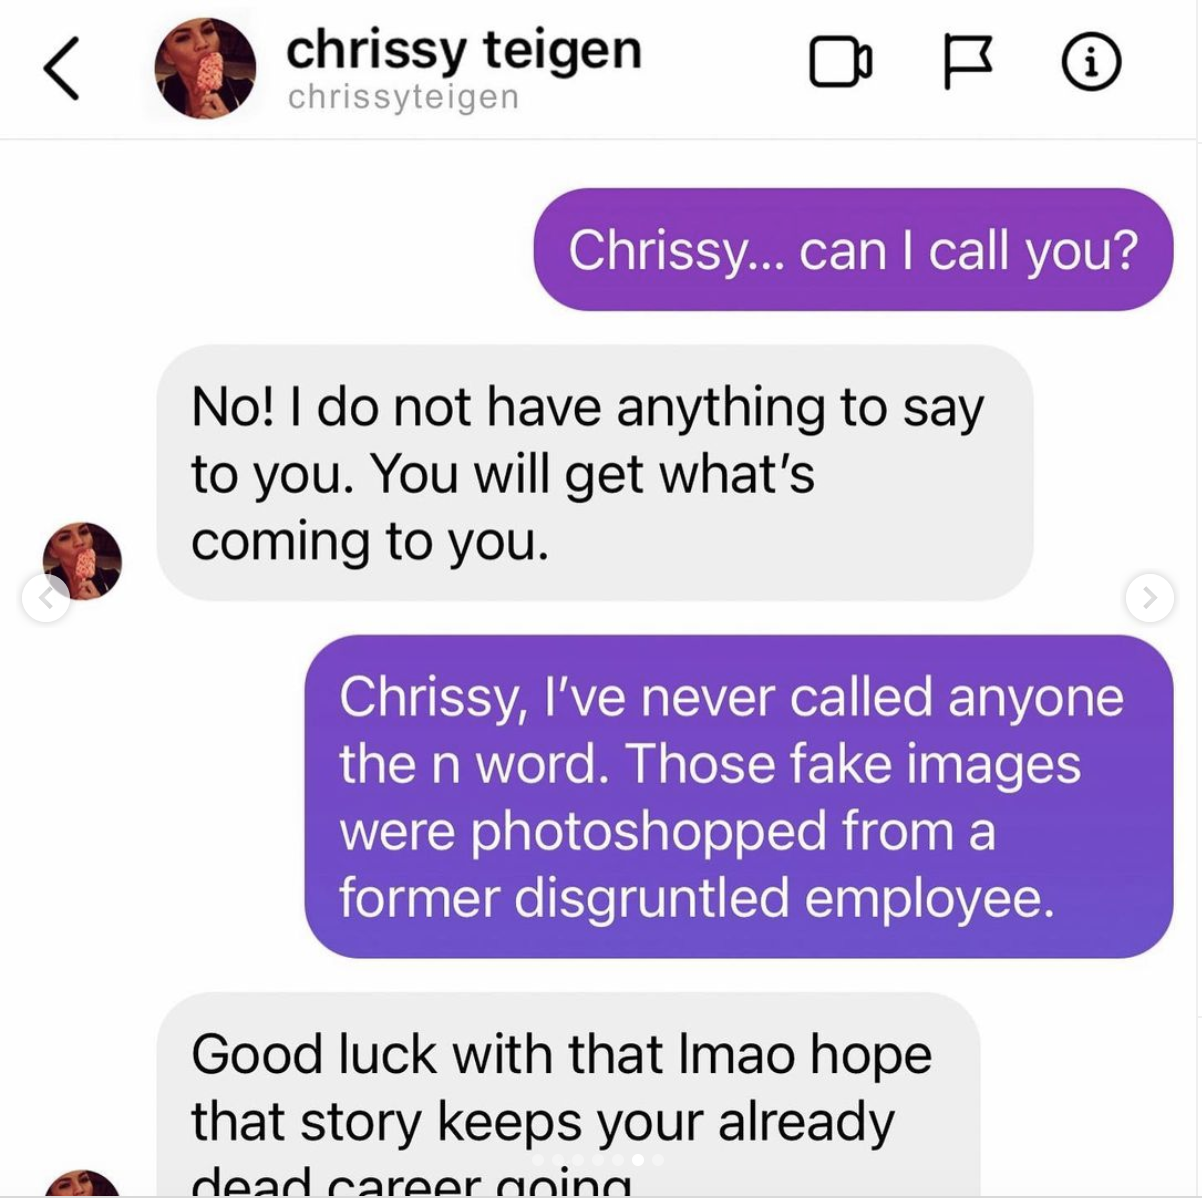 Michael Costello shares alleged DMs between himself and Chrissy Teigen